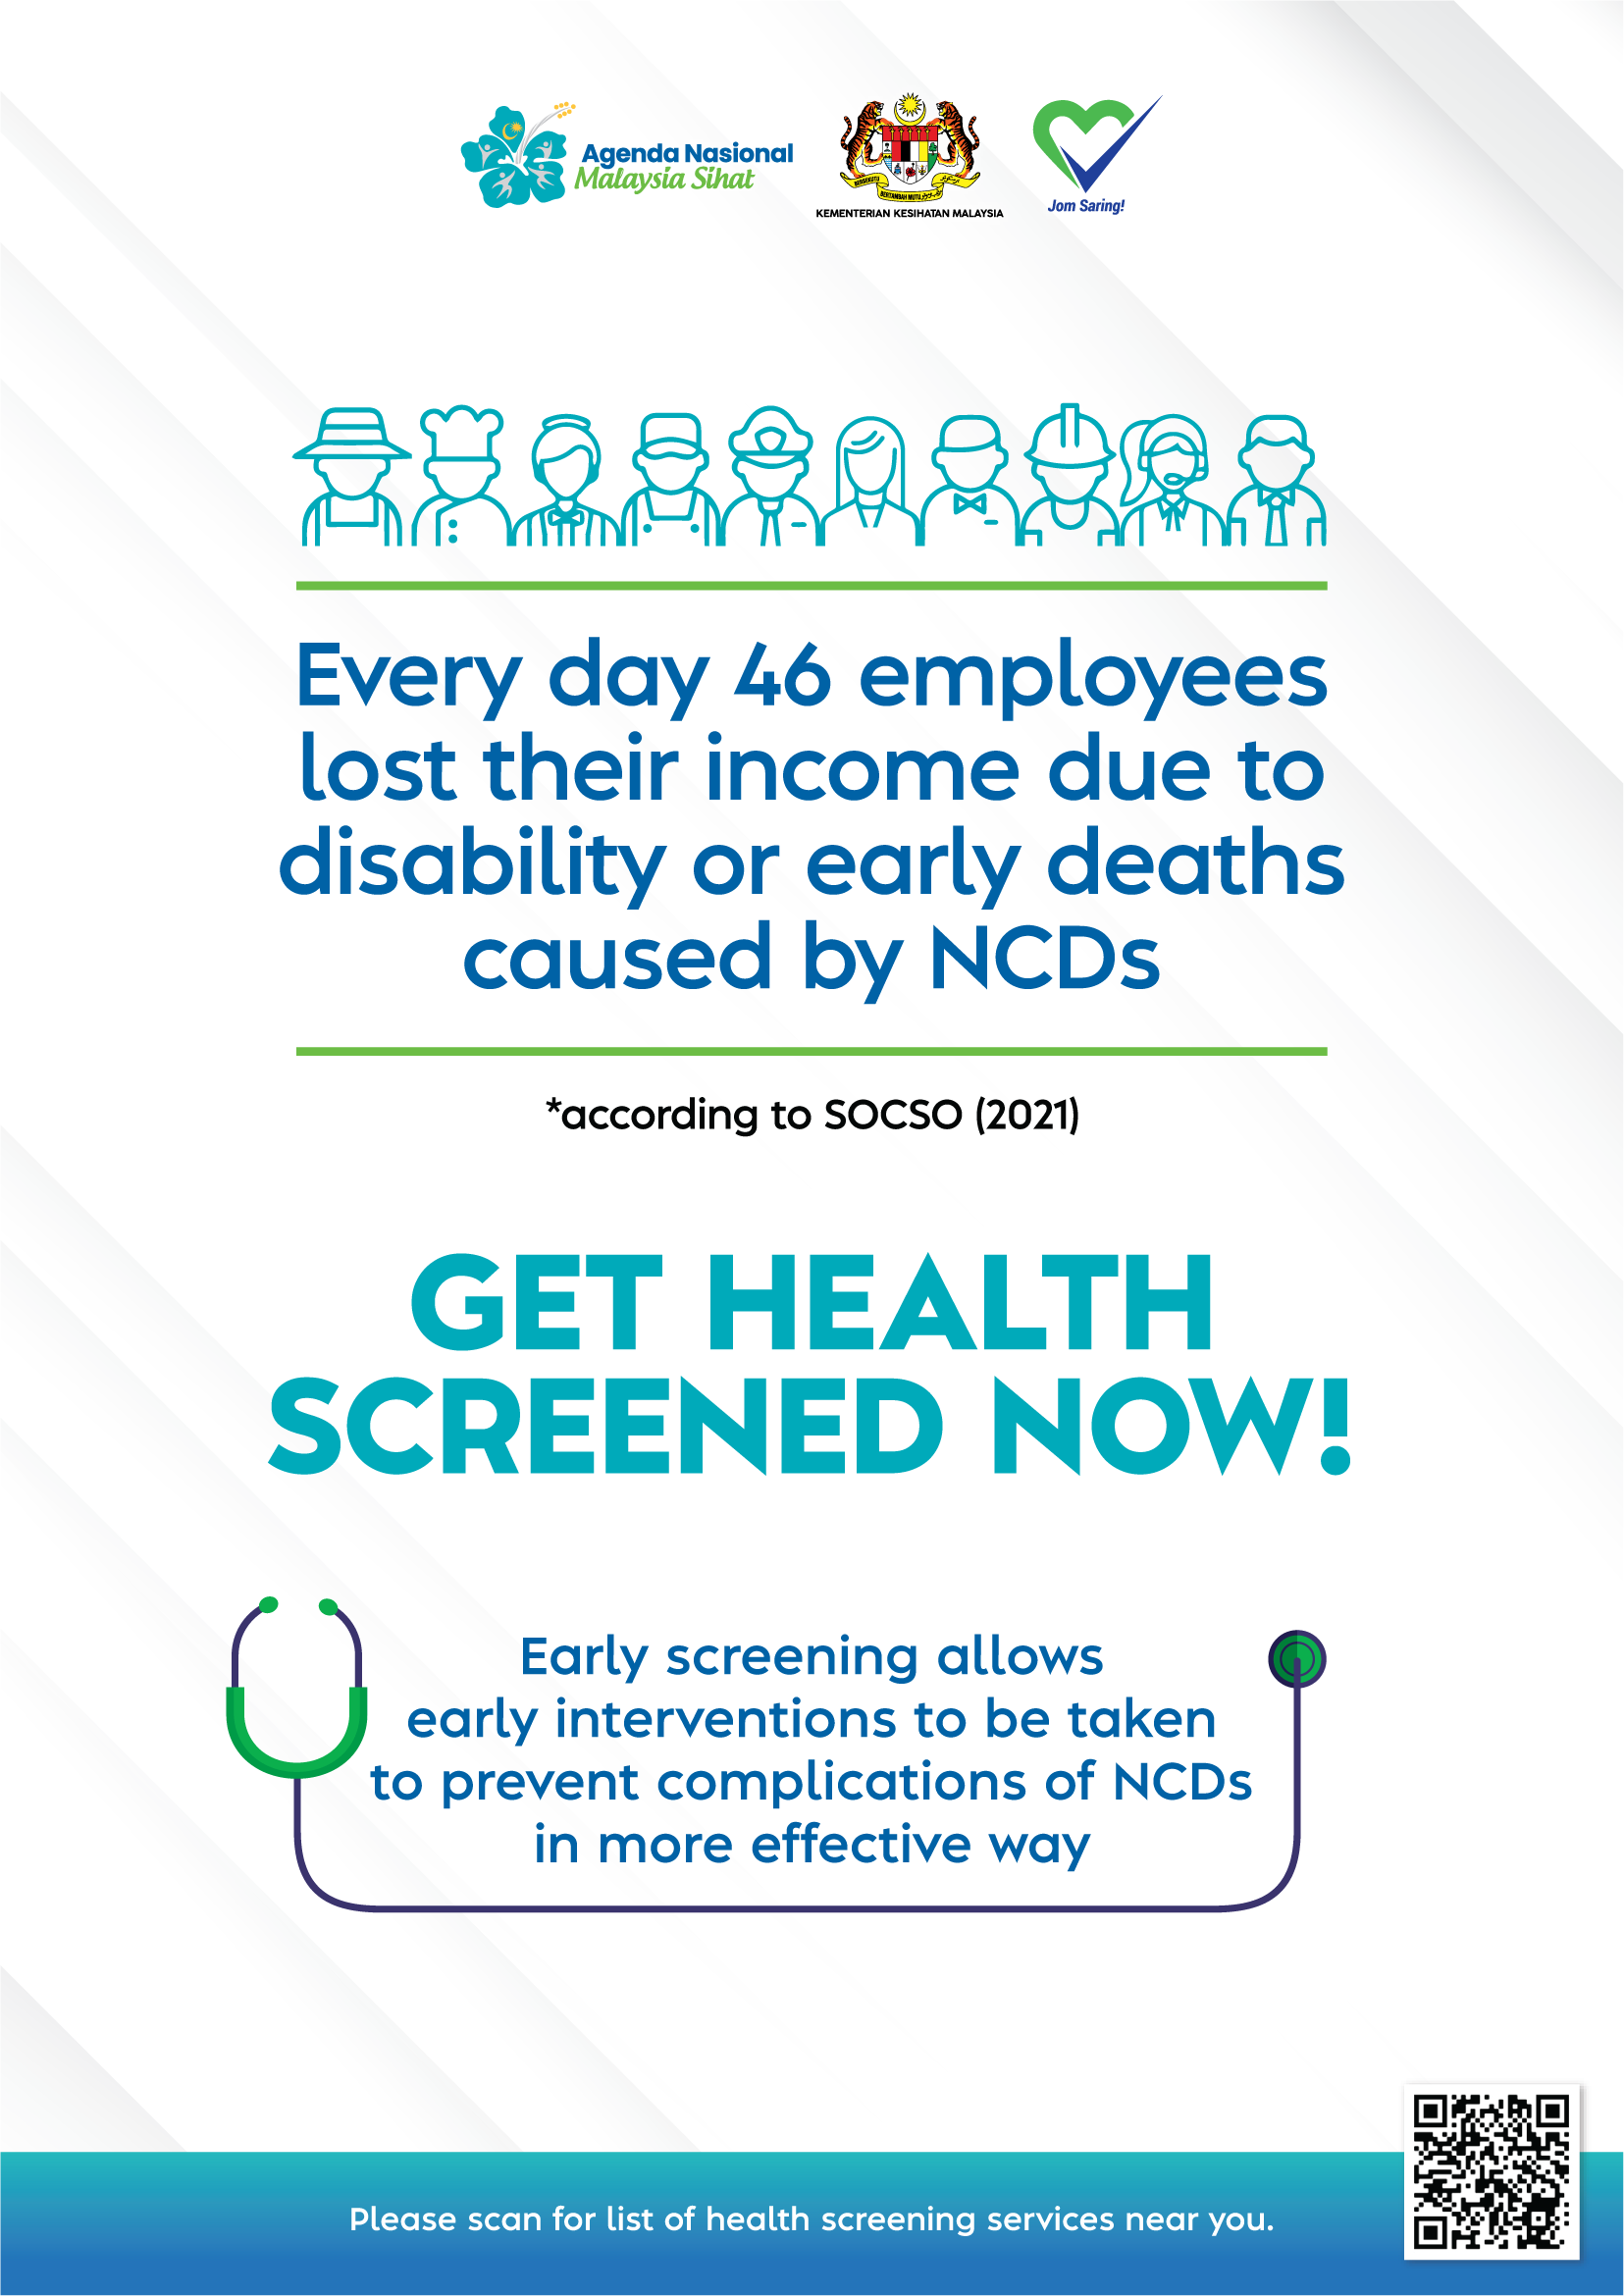 Get Health Screened Now!